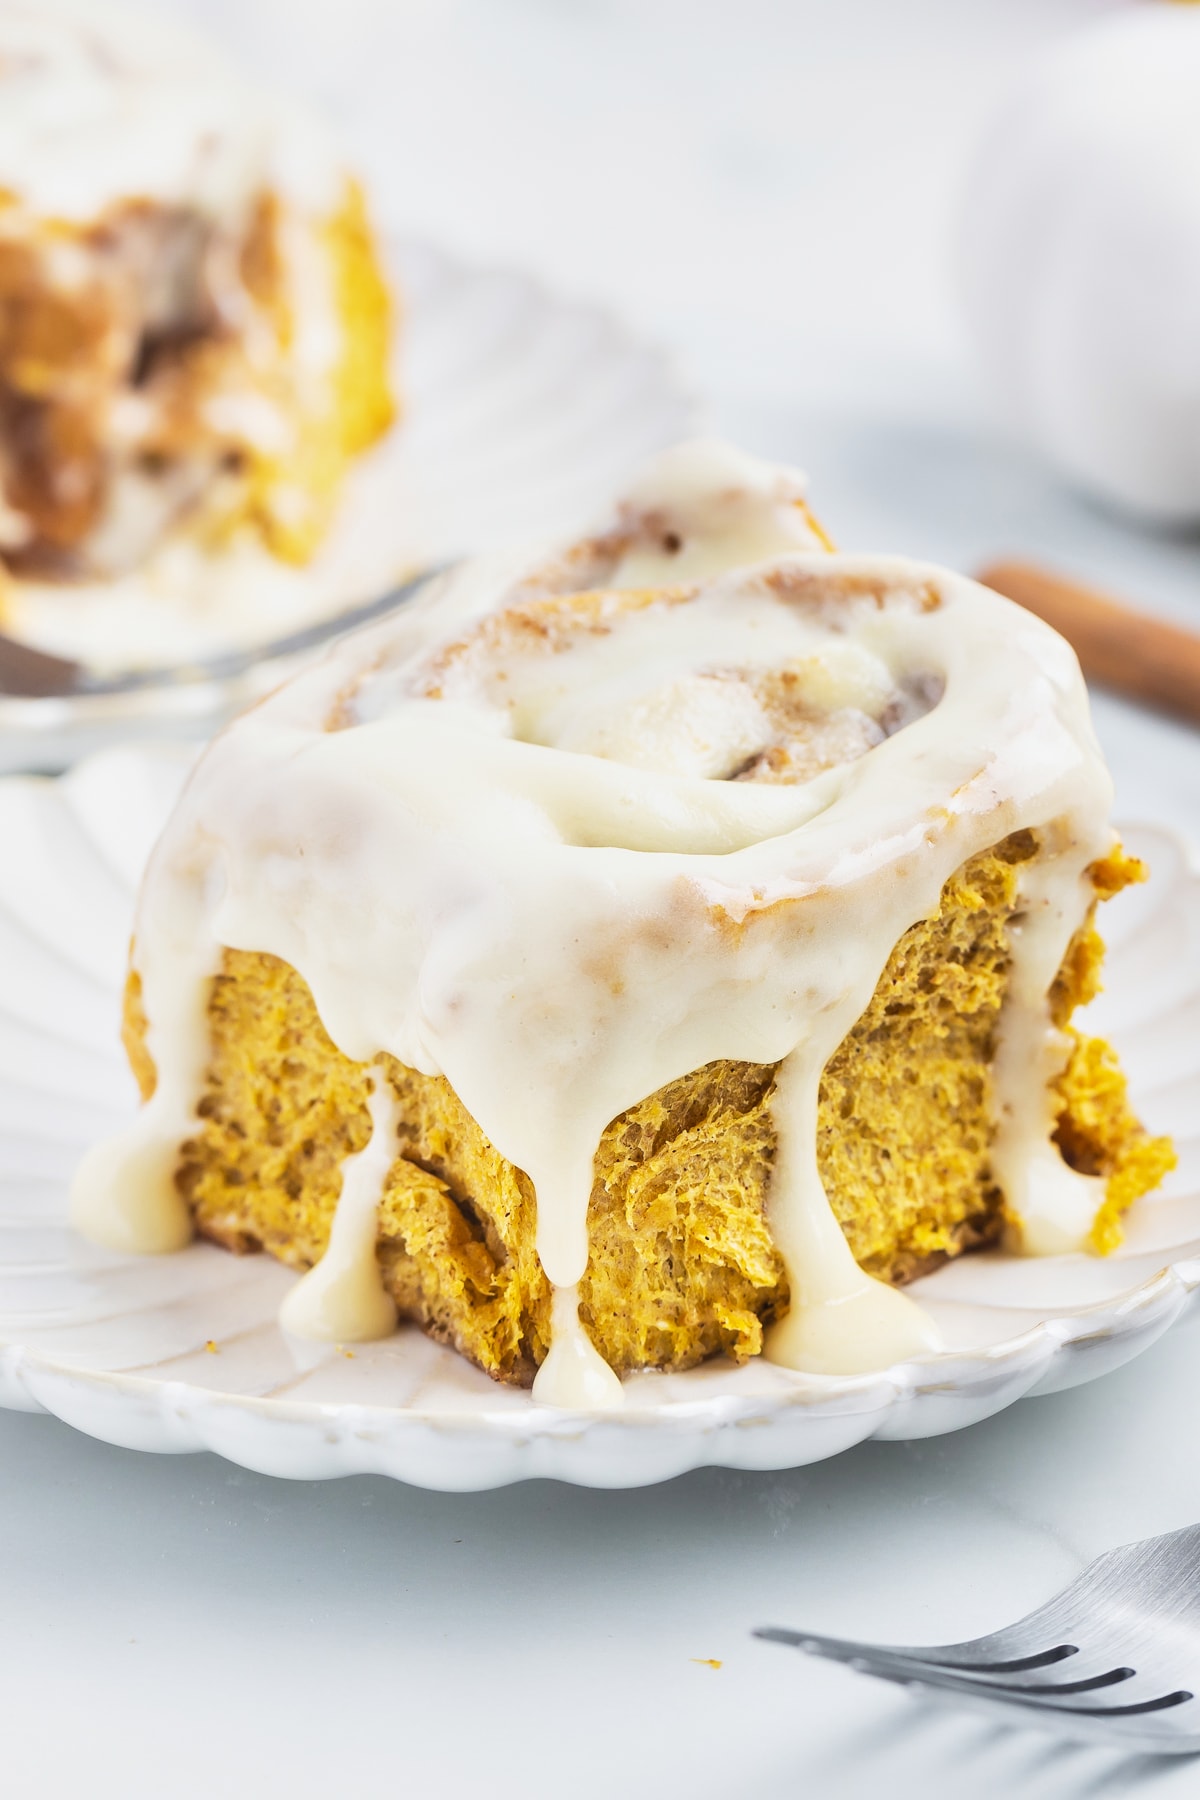 A pumpkin spice cinnamon roll with icing on a plate